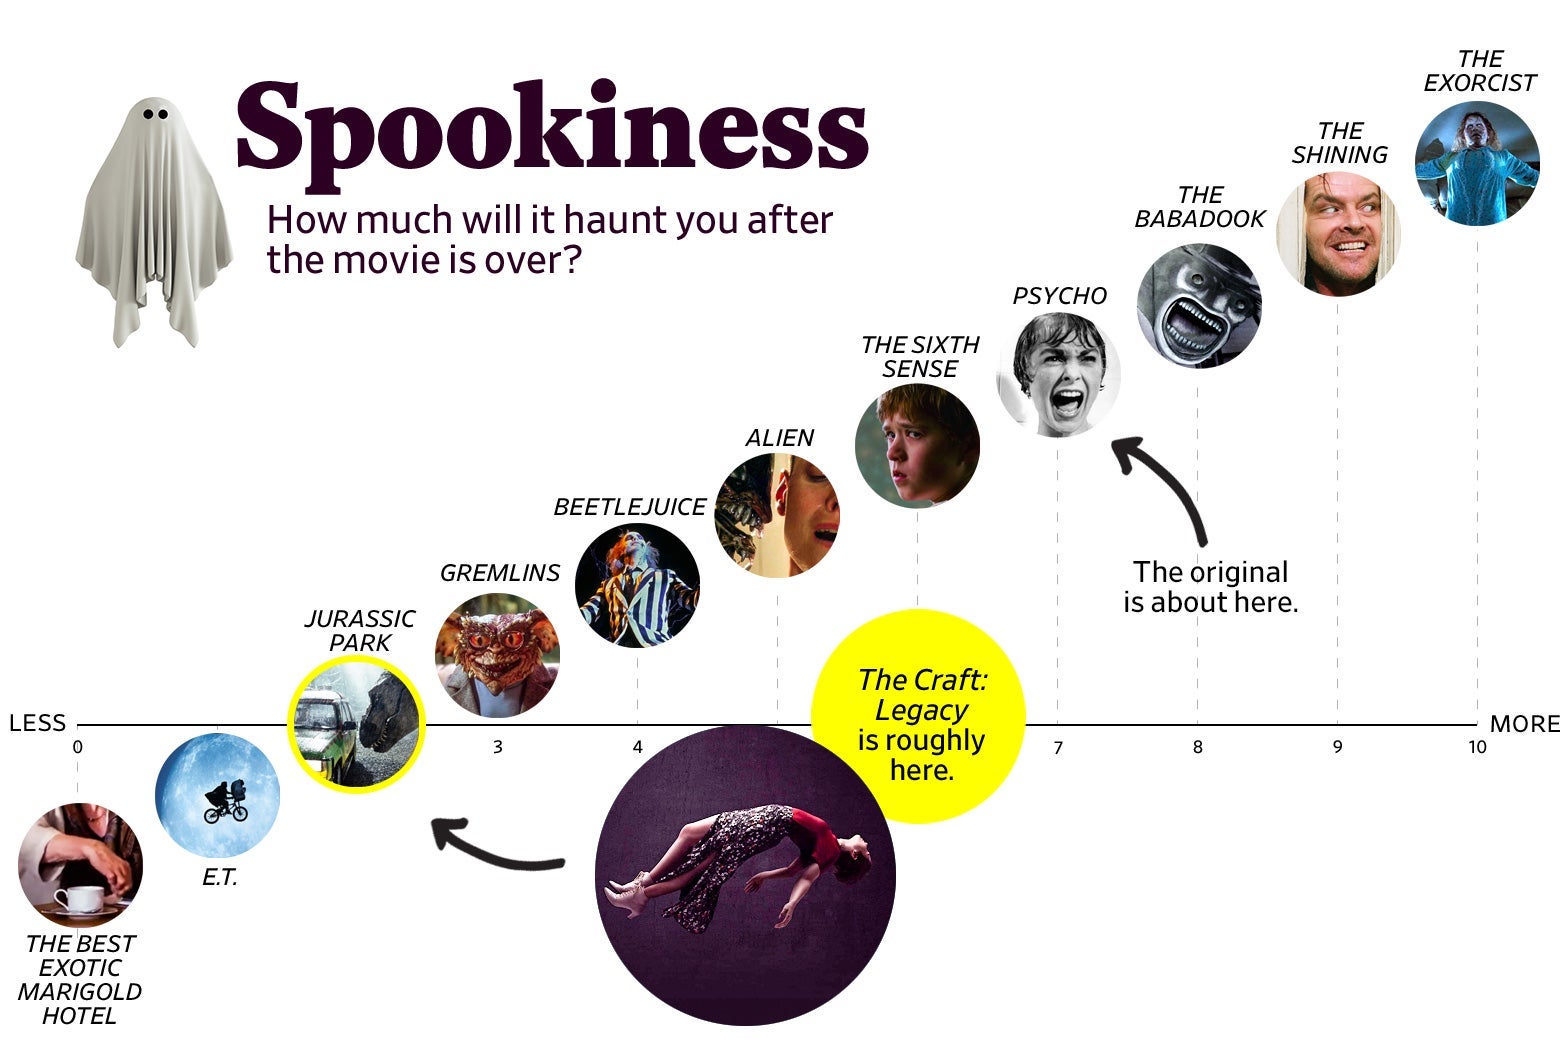 A chart titled “Spookiness: How much will it haunt you after the movie is over?” shows that The Craft: Legacy ranks a 2 in spookiness, roughly the same as Jurassic Park, while the original ranks about a 7, roughly the same as Psycho. The scale ranges from The Best Exotic Marigold Hotel (0) to The Exorcist (10). 